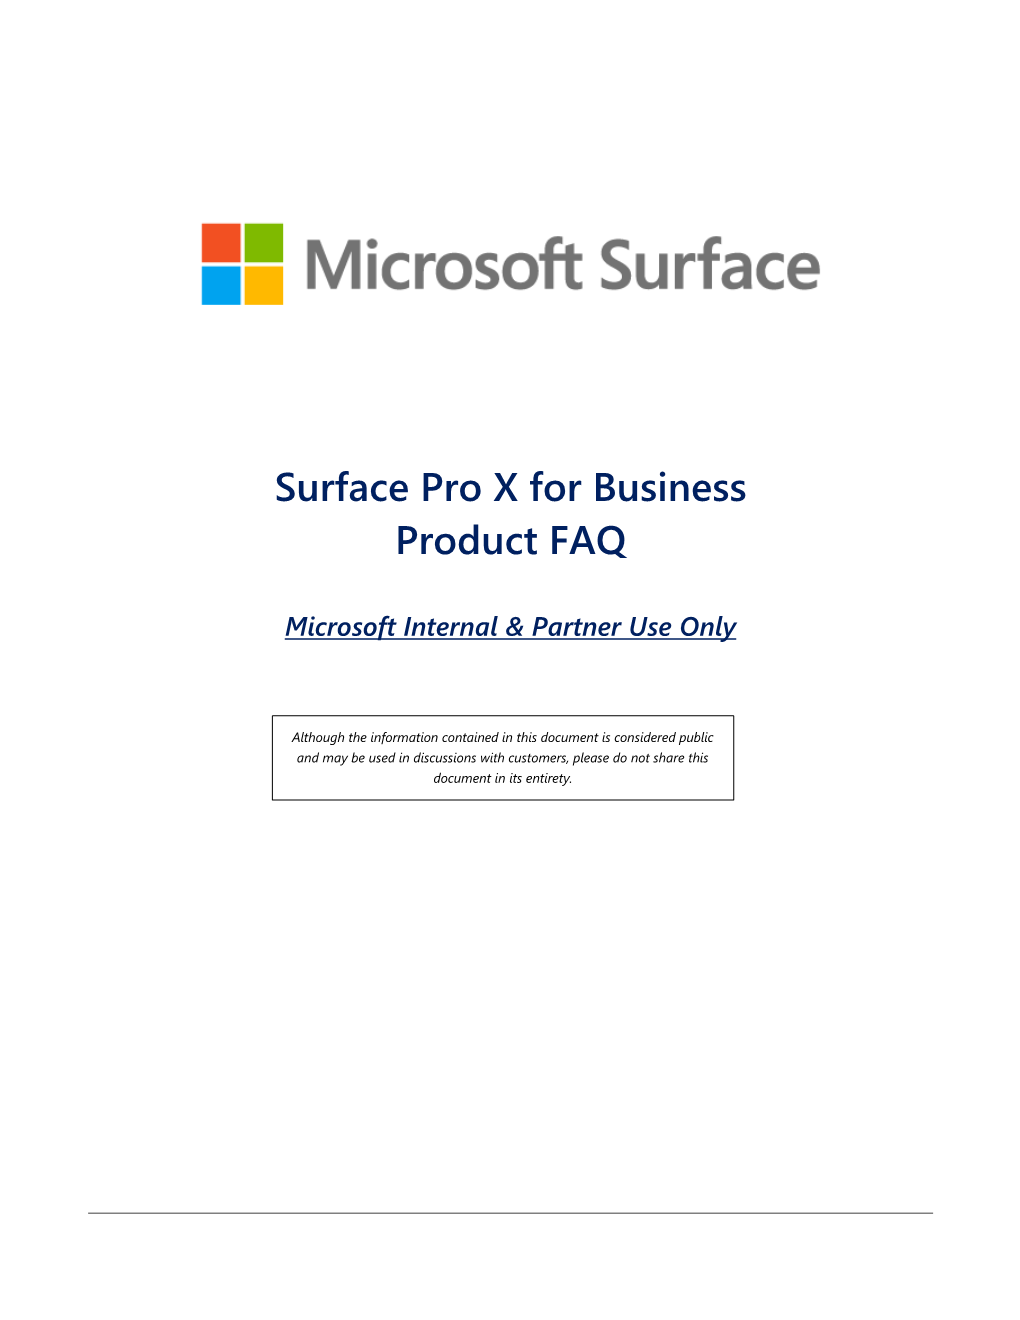 Surface Pro X for Business Product FAQ